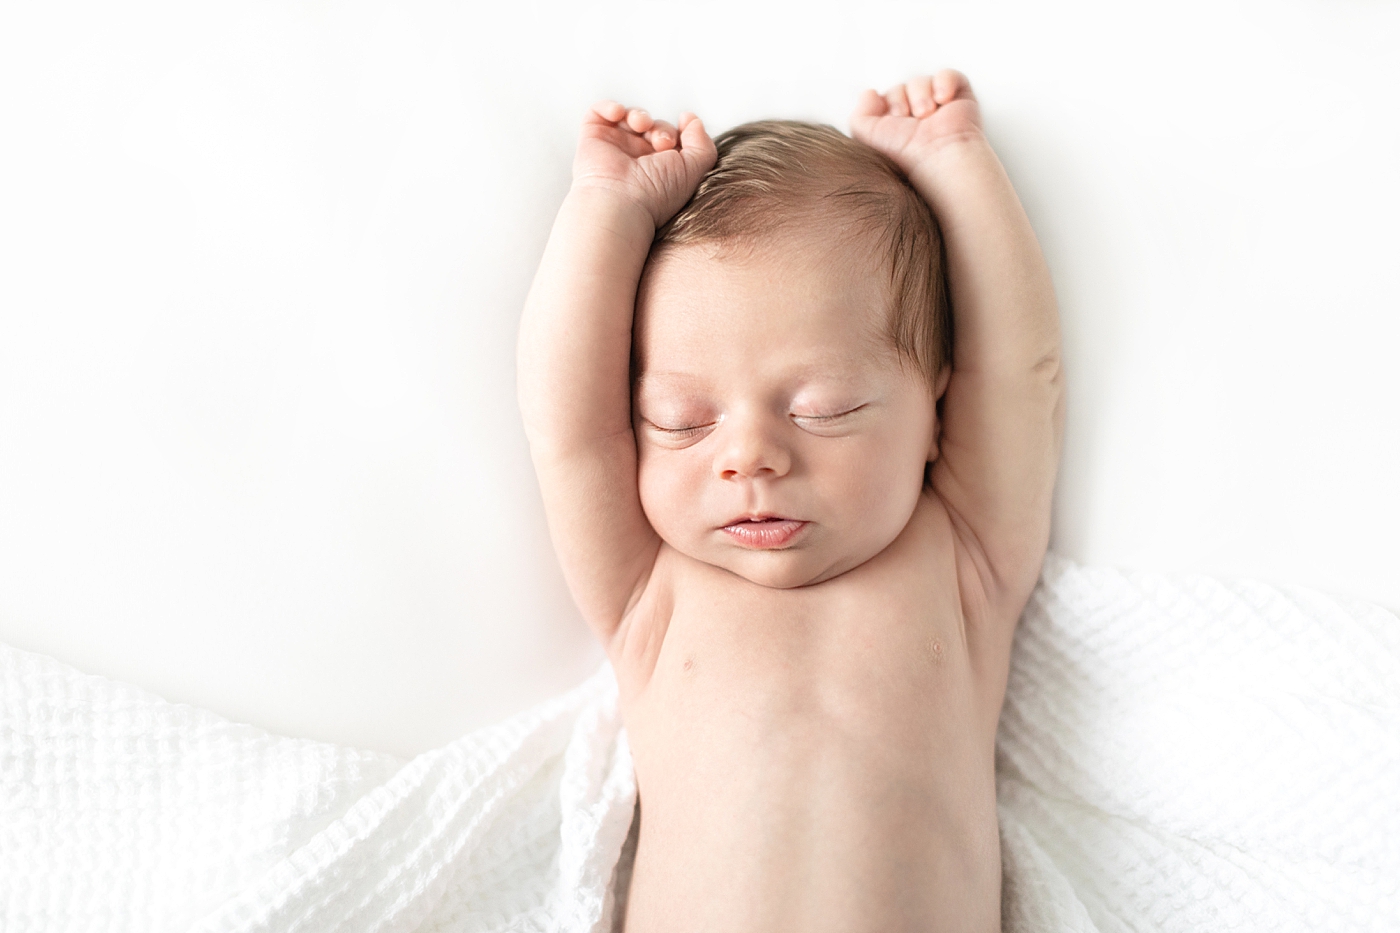 Newborn baby stretching wrapped in a white swaddle | Imaged by Chrissy Winchester